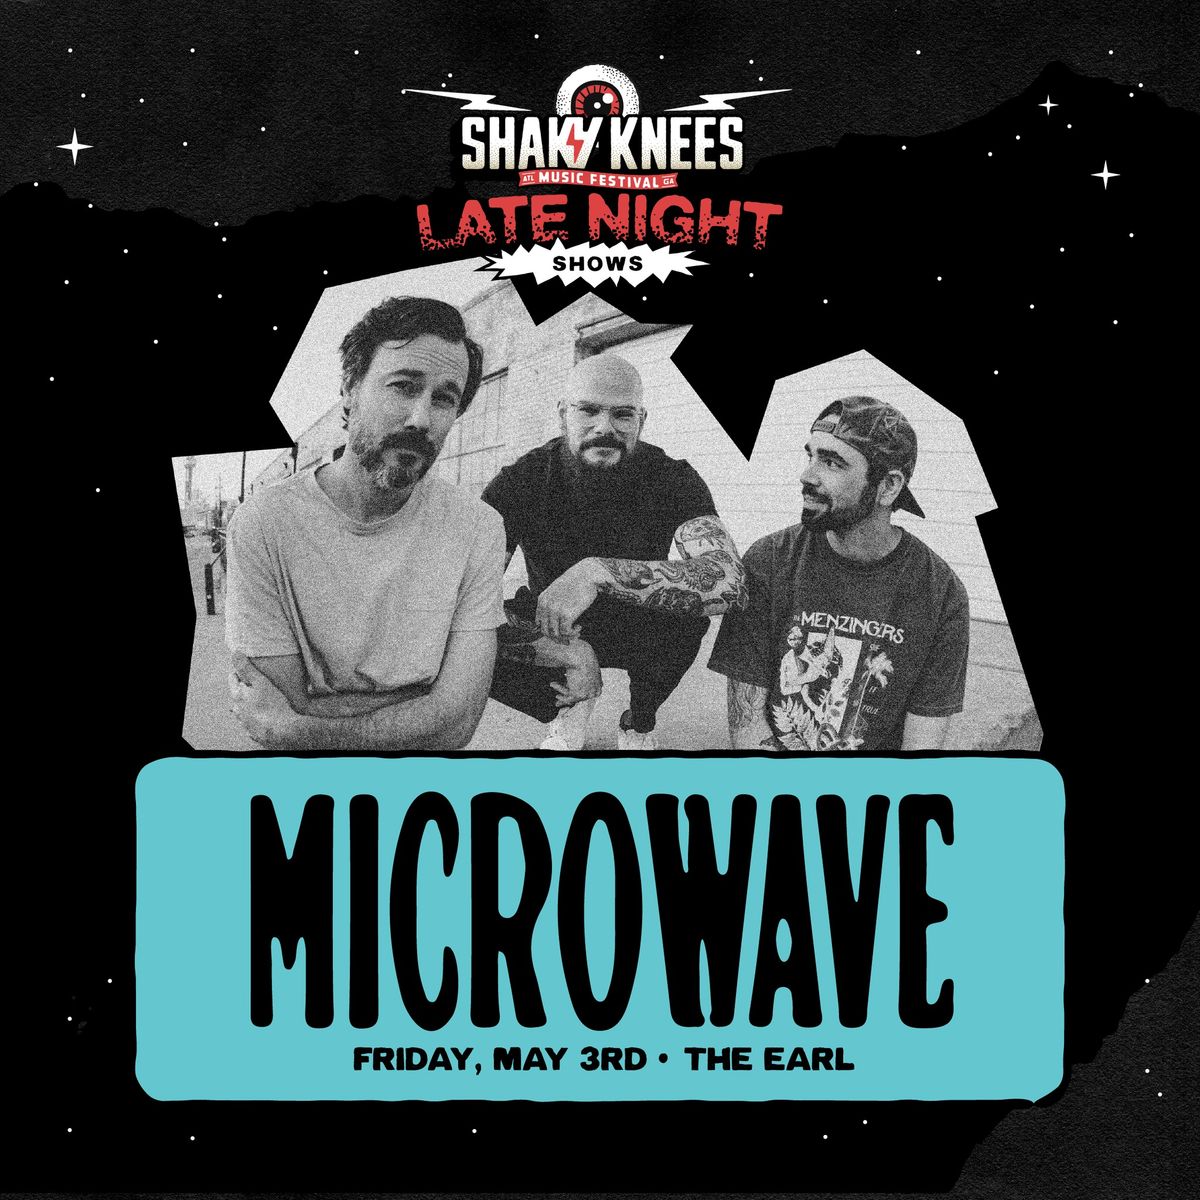 An Evening with Microwave